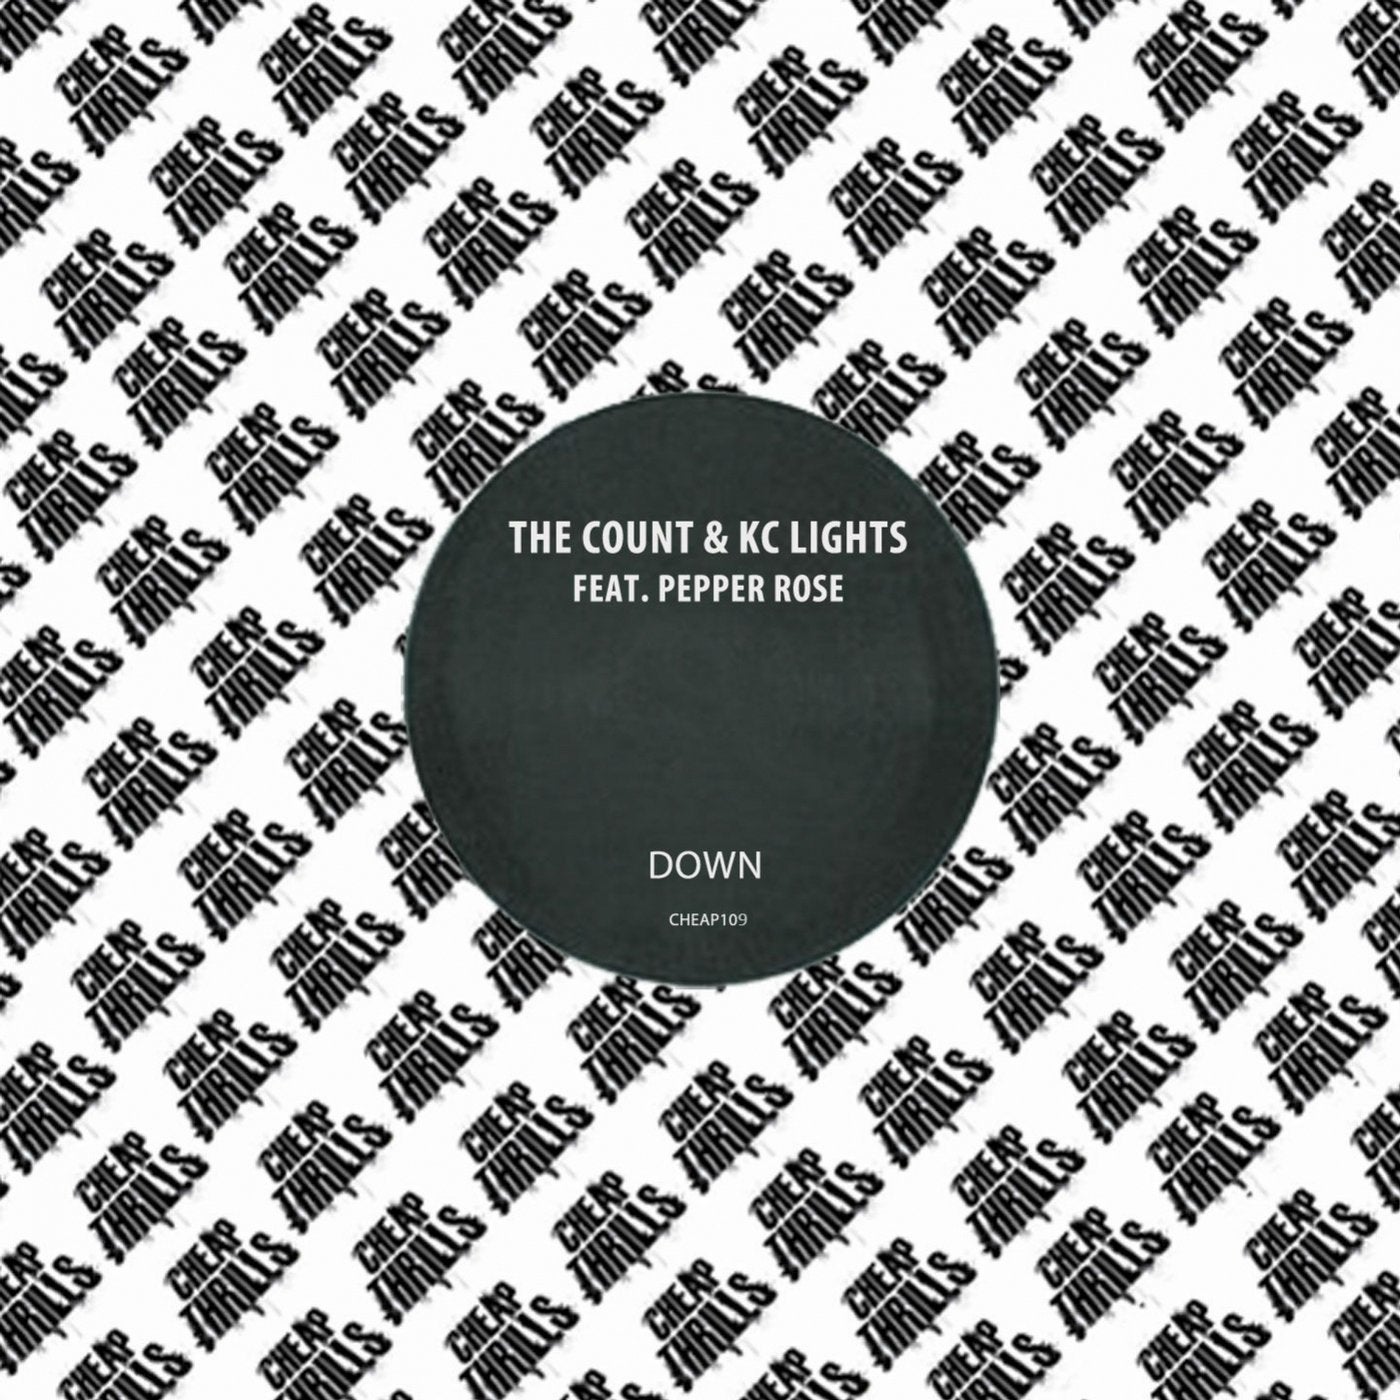 Down (feat. Pepper Rose)